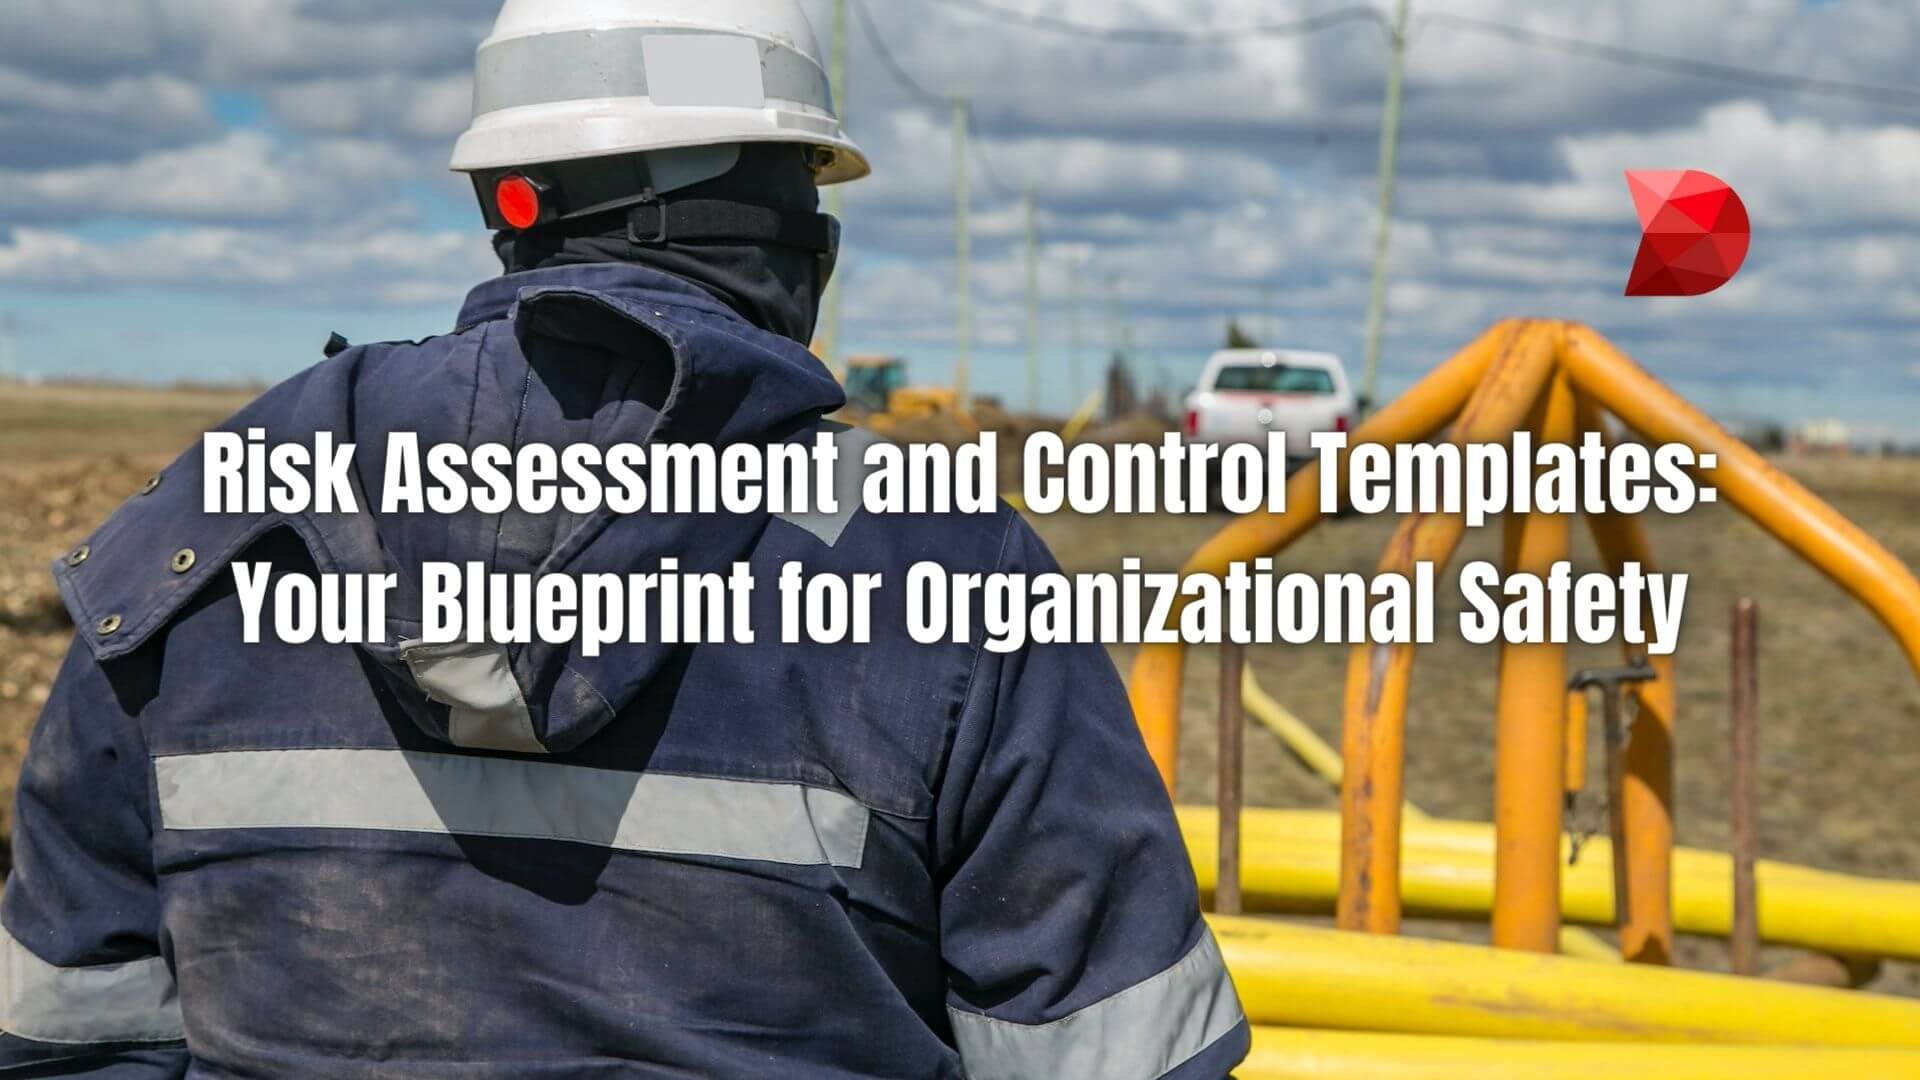 Risk assessment and control matrix templates provide an approach for organizations to identify, assess, and mitigate risks. Learn more!